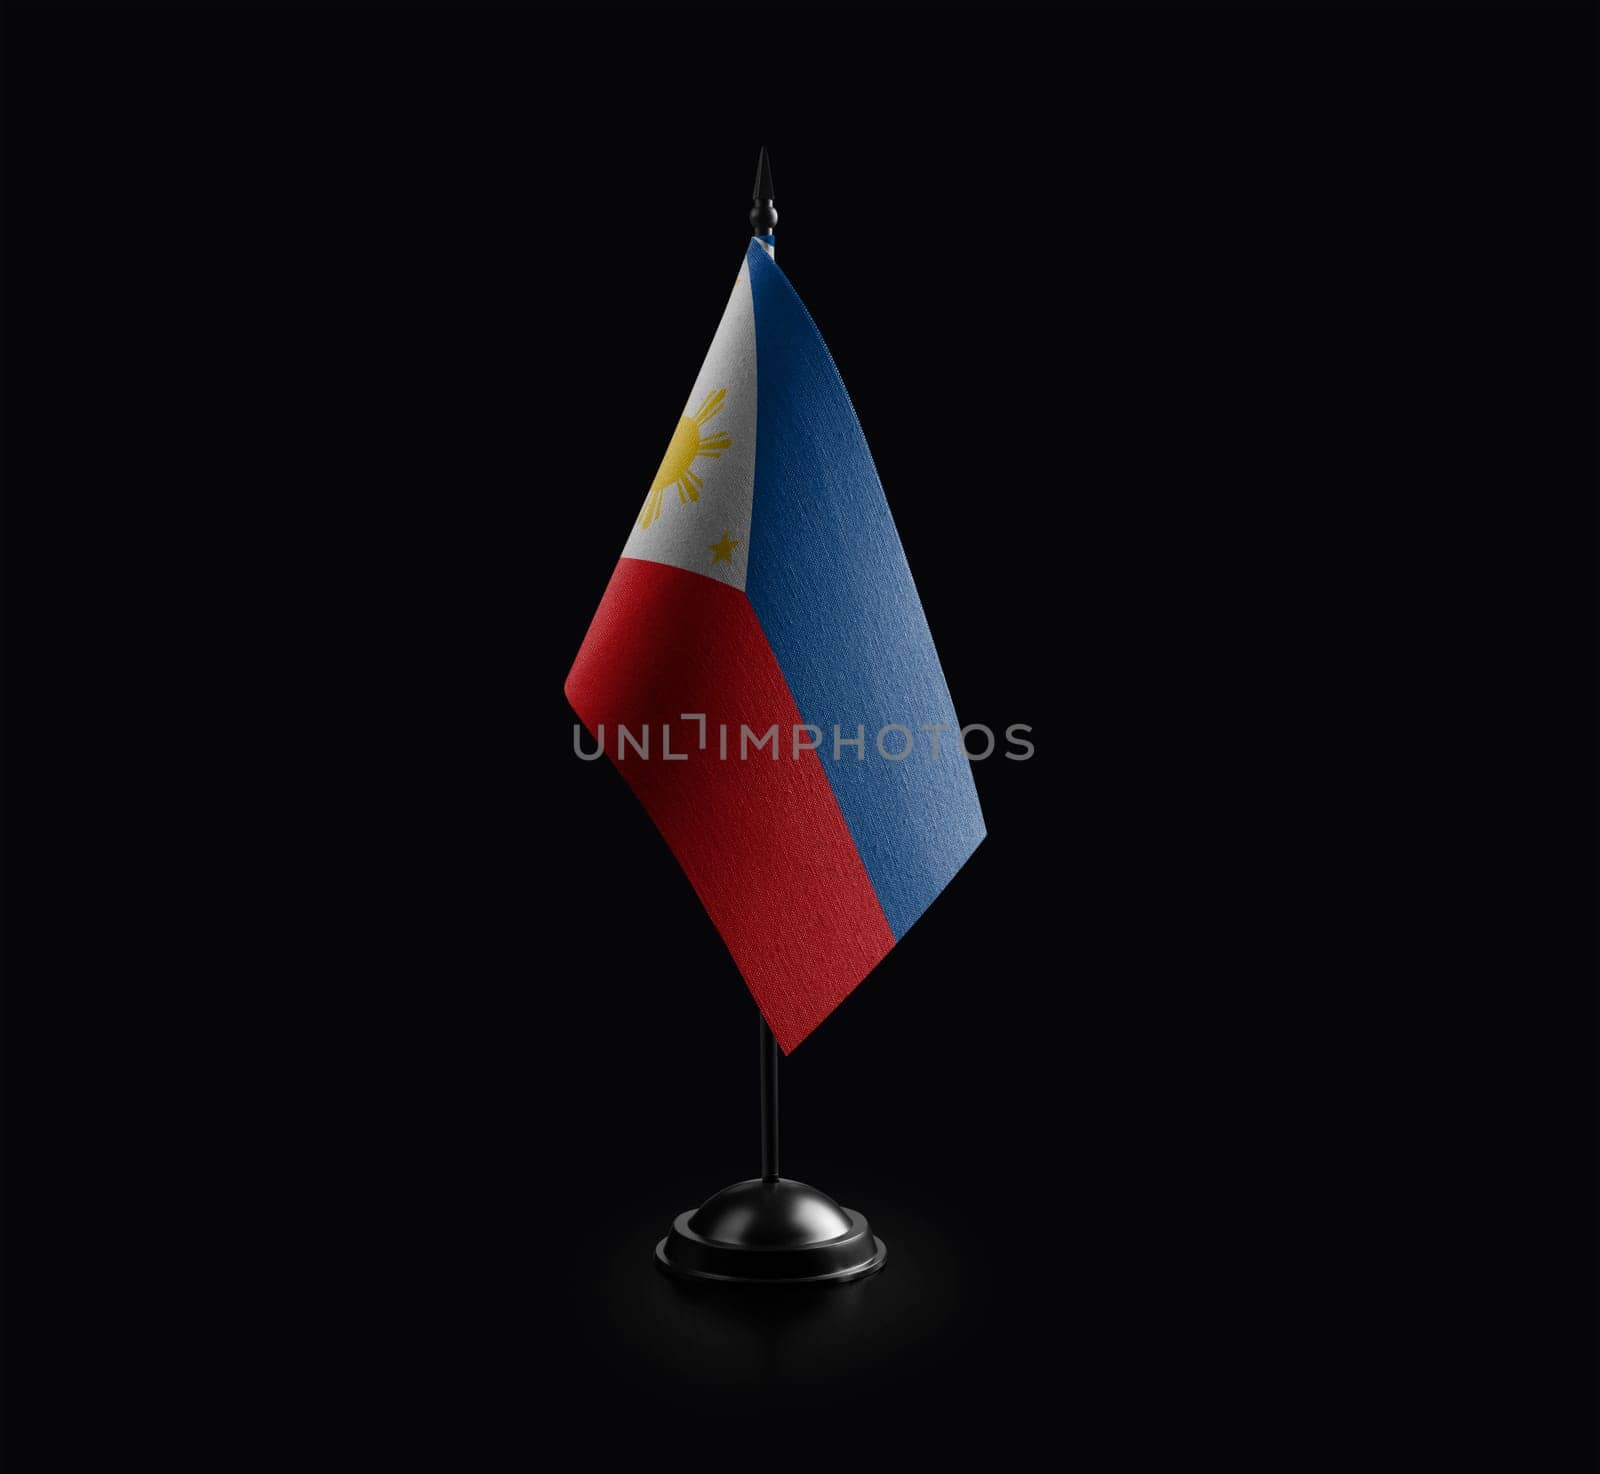 Small national flag of the Philippines on a black background.